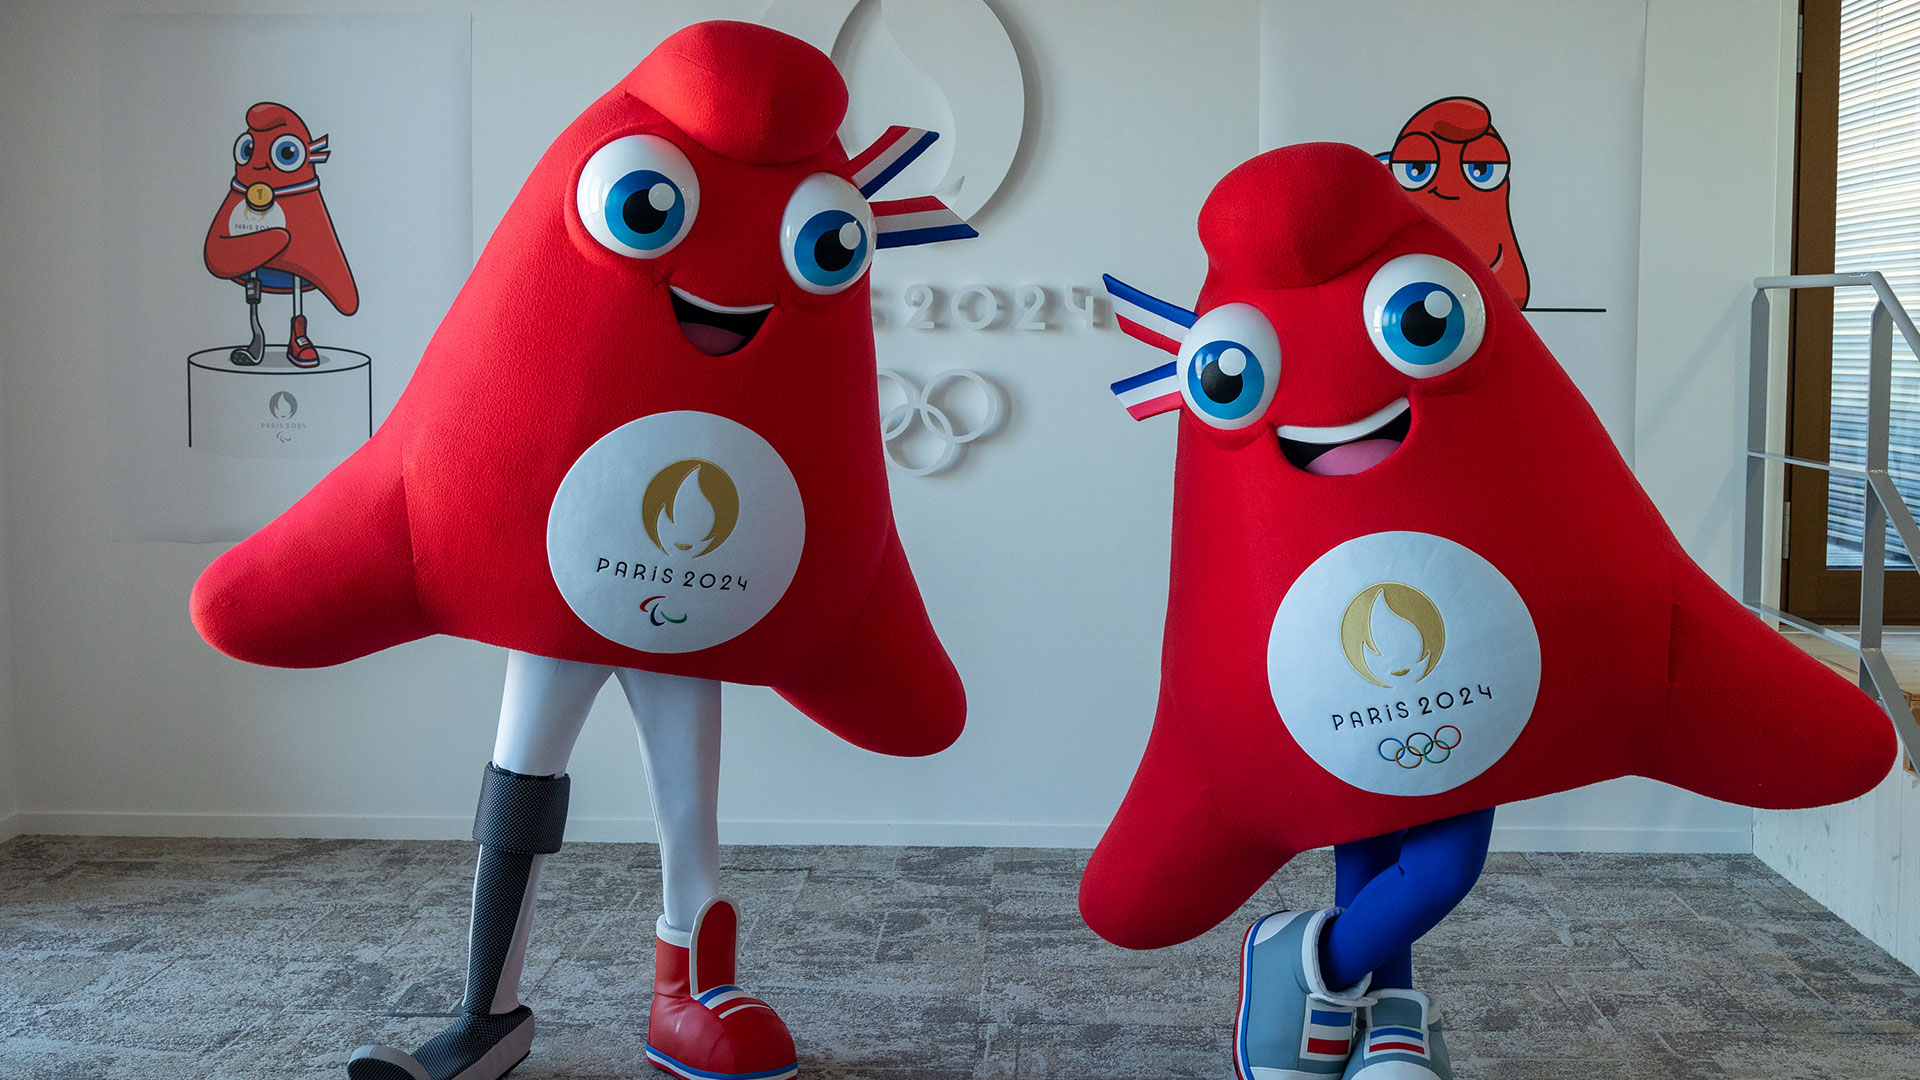 PARIS, FRANCE - NOVEMBER 10: The Phryges, modelled on phrygian caps, are unveiled as the mascots for the Paris 2024 Summer Olympic and Paralympic Games on November 10, 2022 in Paris, France.
Foto. Marc Piasecki/Getty Images